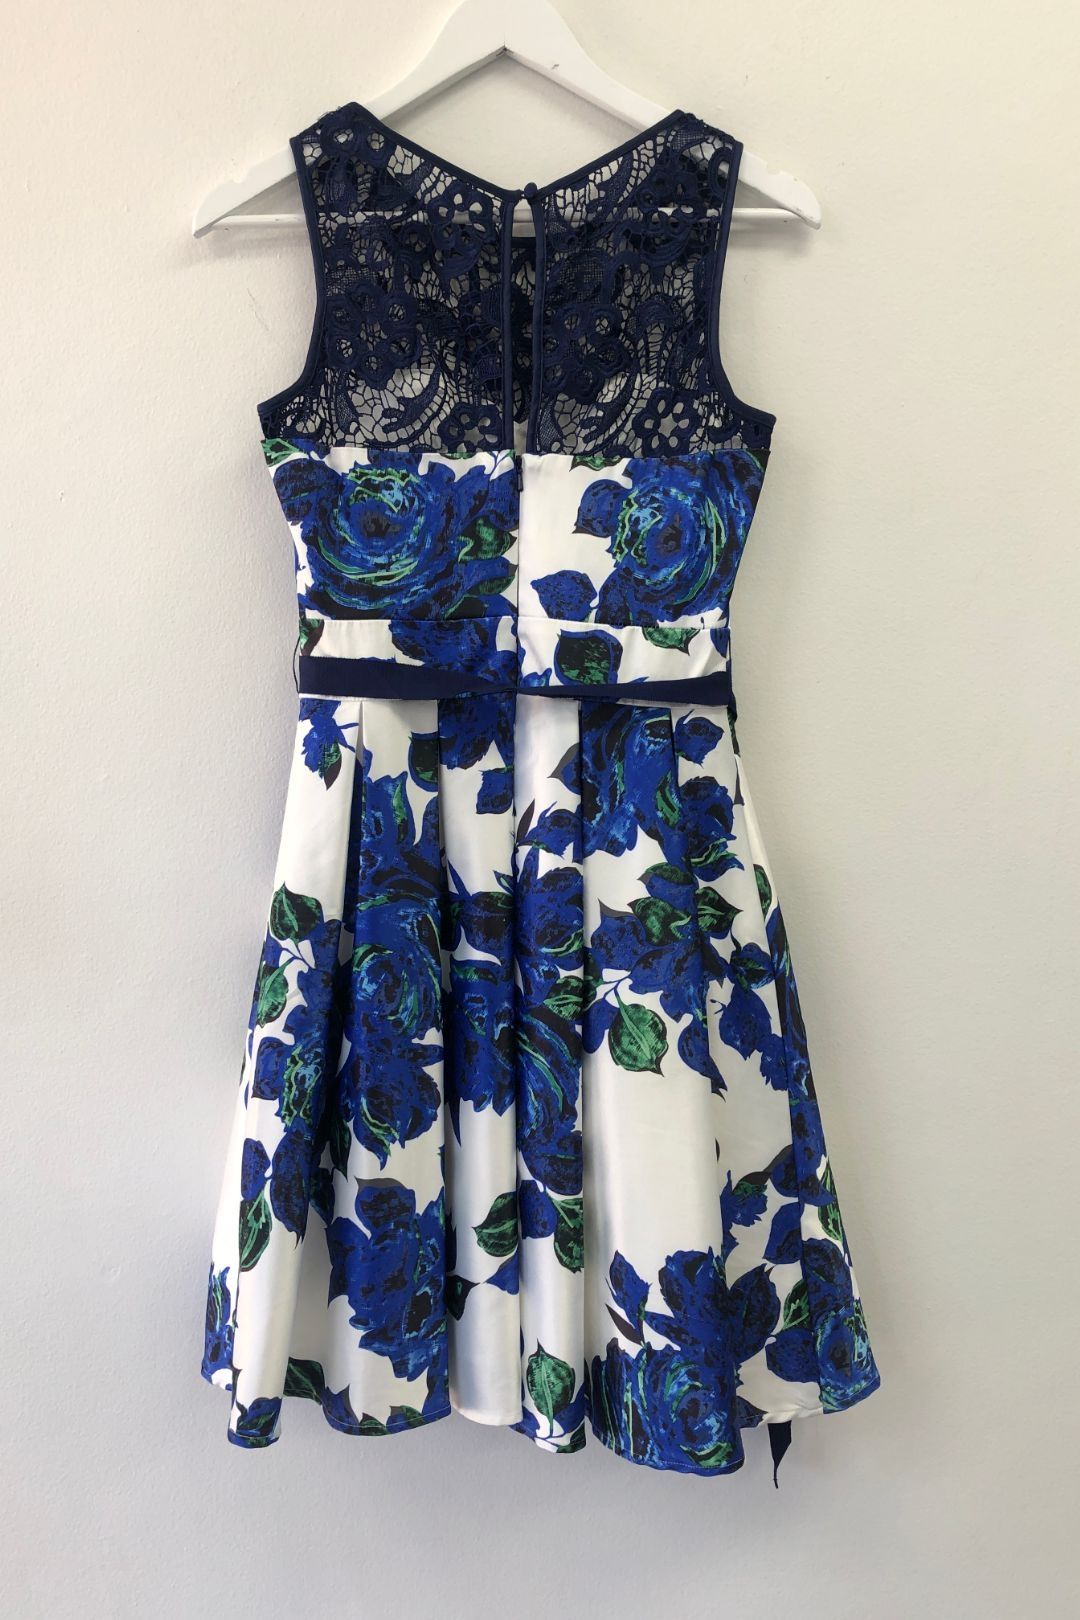 Review - Fit and Flare Grosvenor Dress